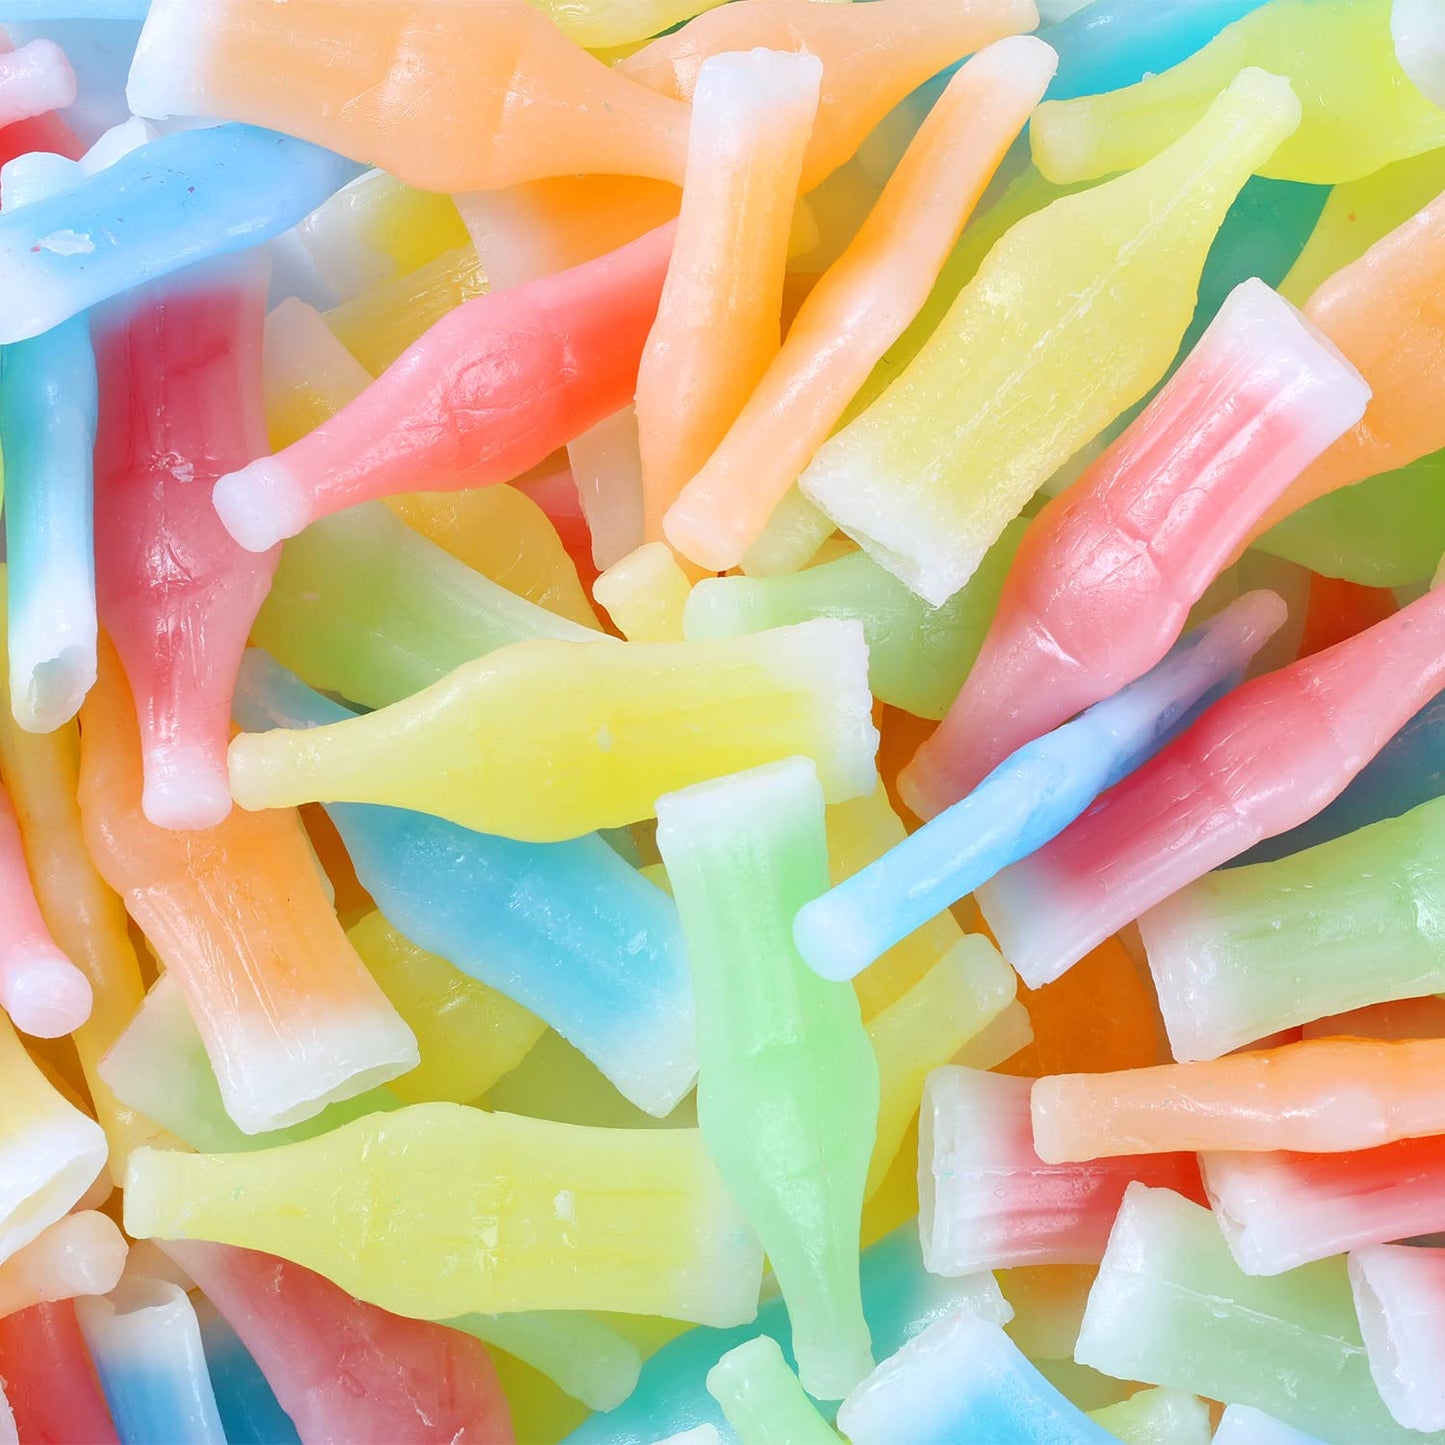 Wax Bottle Candy - 3 LB - Wax Candy Bottles With Juice - Candies for Kids - Old School 90's Chewy Wax Candy Drinks - Bulk Candy